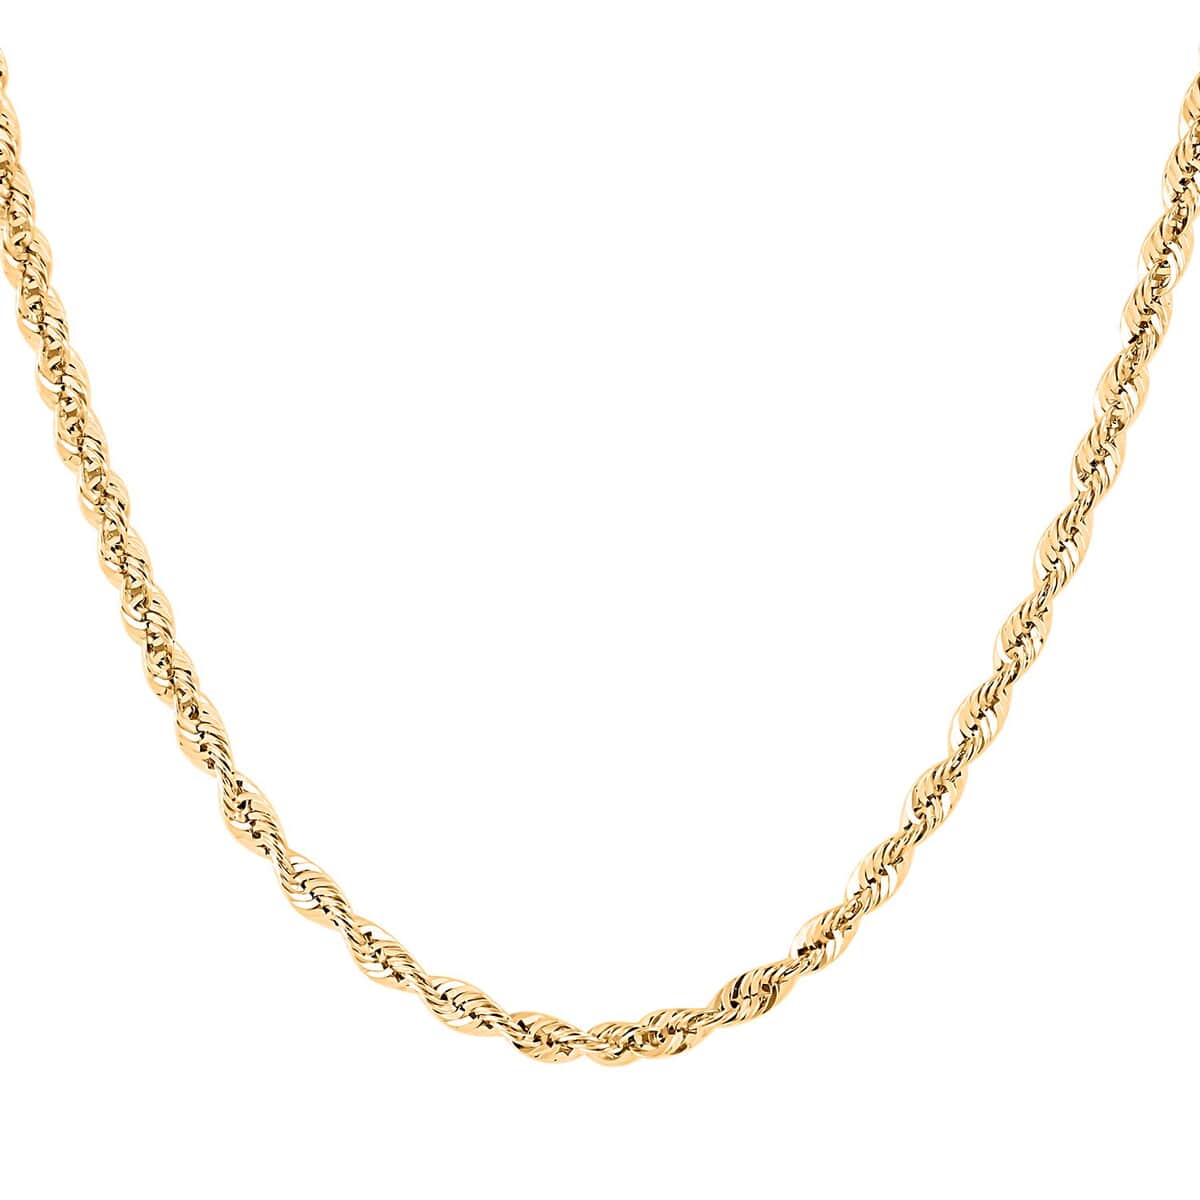 Buy 10K Yellow Gold 3.5mm Rope Chain Necklace 22 Inches 7.30 Grams at ...